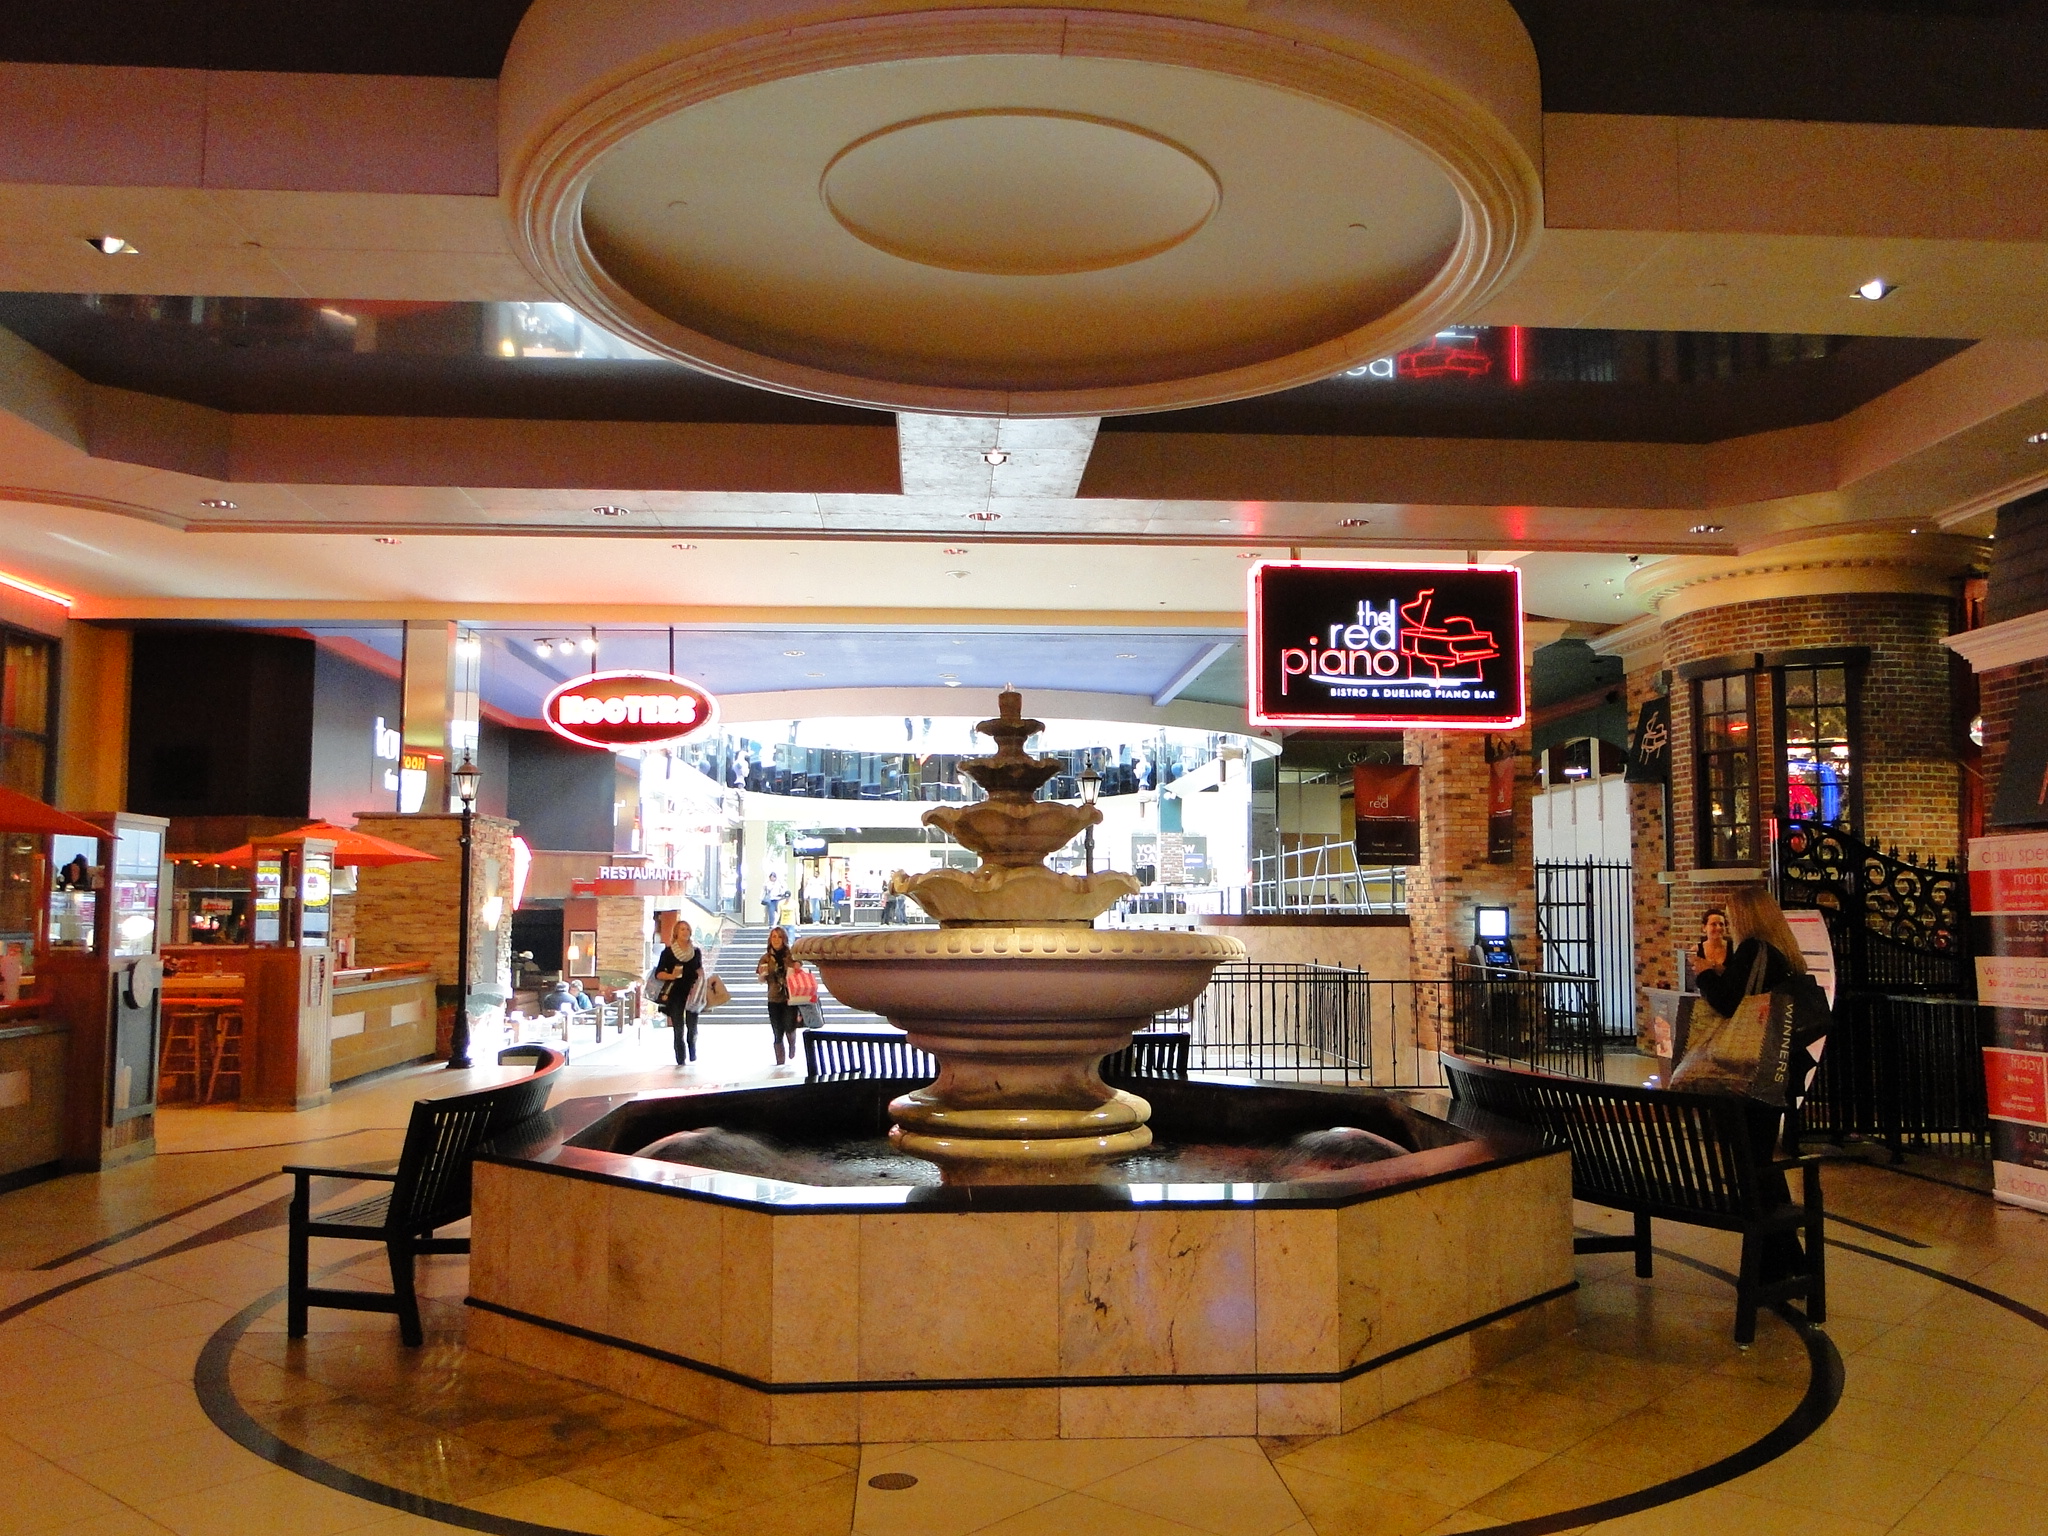 Cookies By George at West Edmonton Mall (Edmonton, CANADA) ★★★★☆ | A